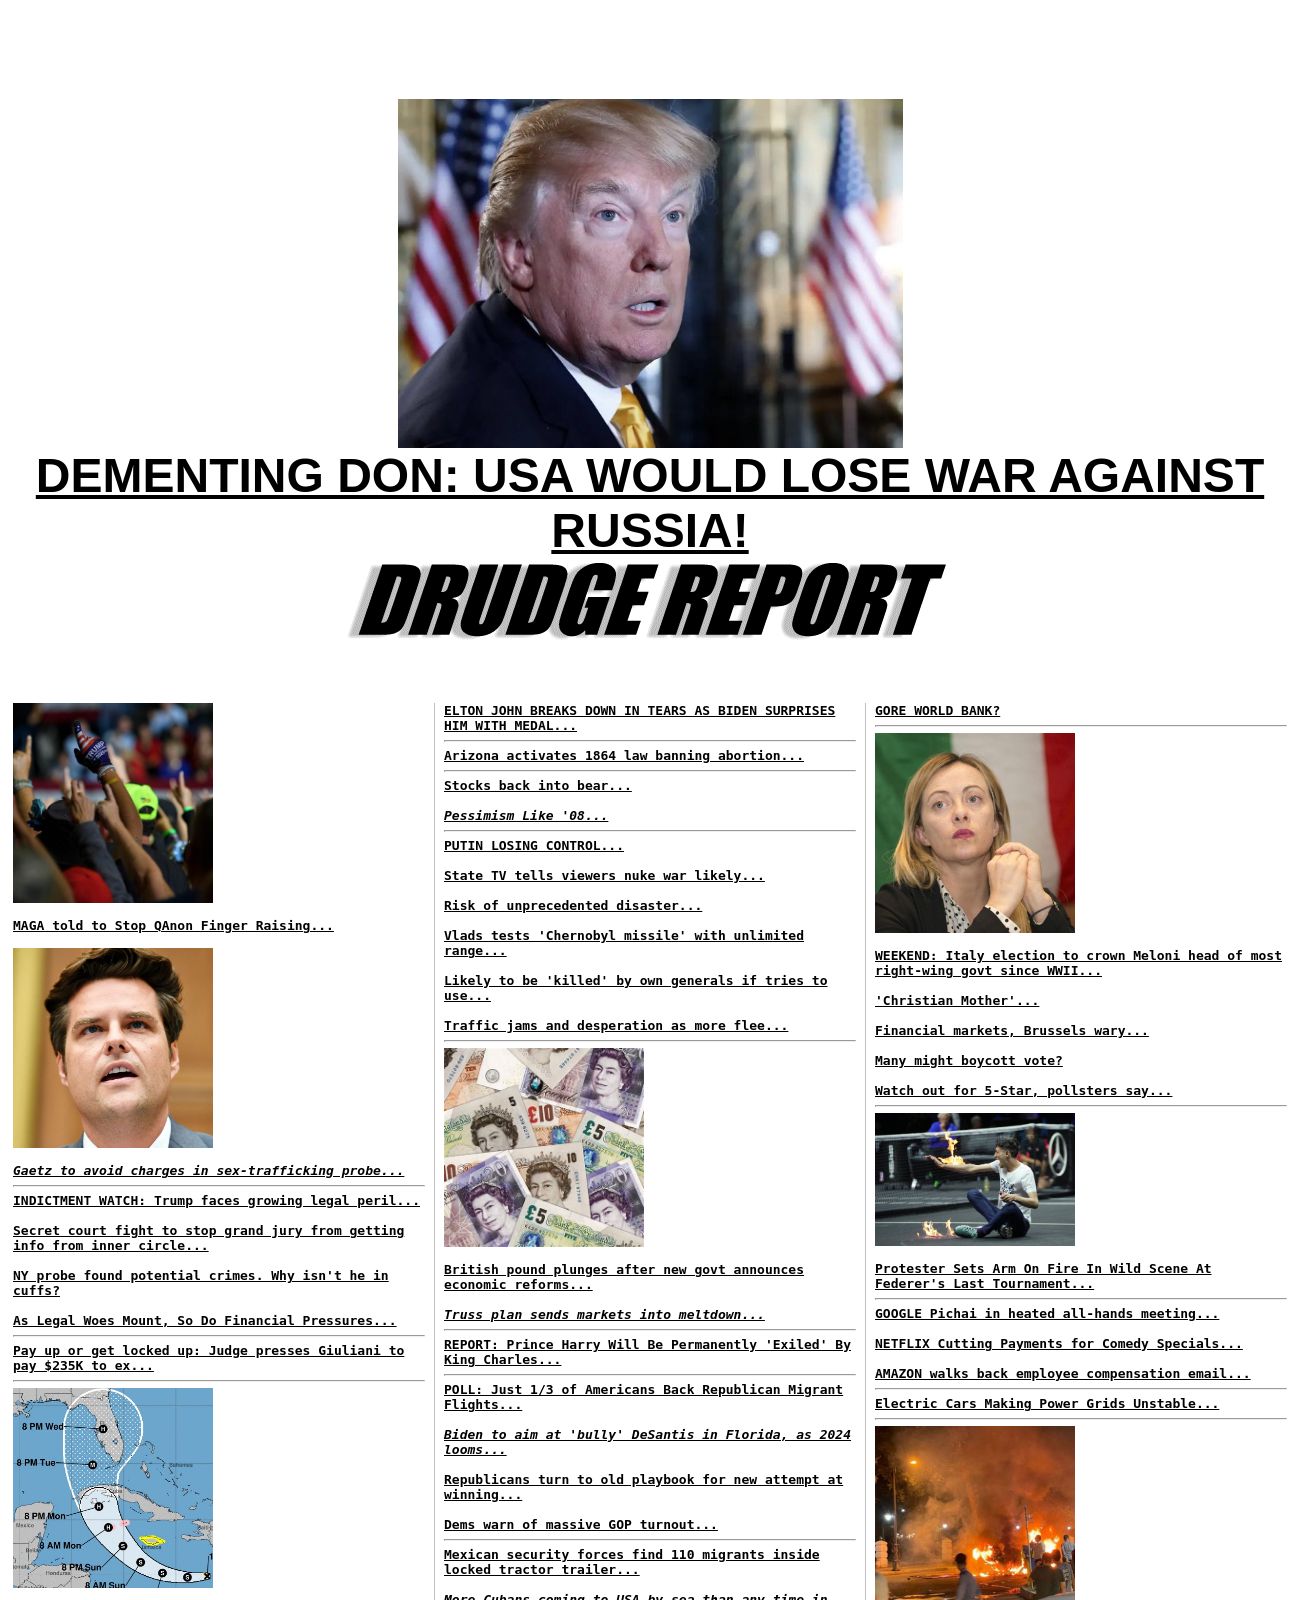 Drudge Report at 2022-09-24 07:47:36-04:00 local time